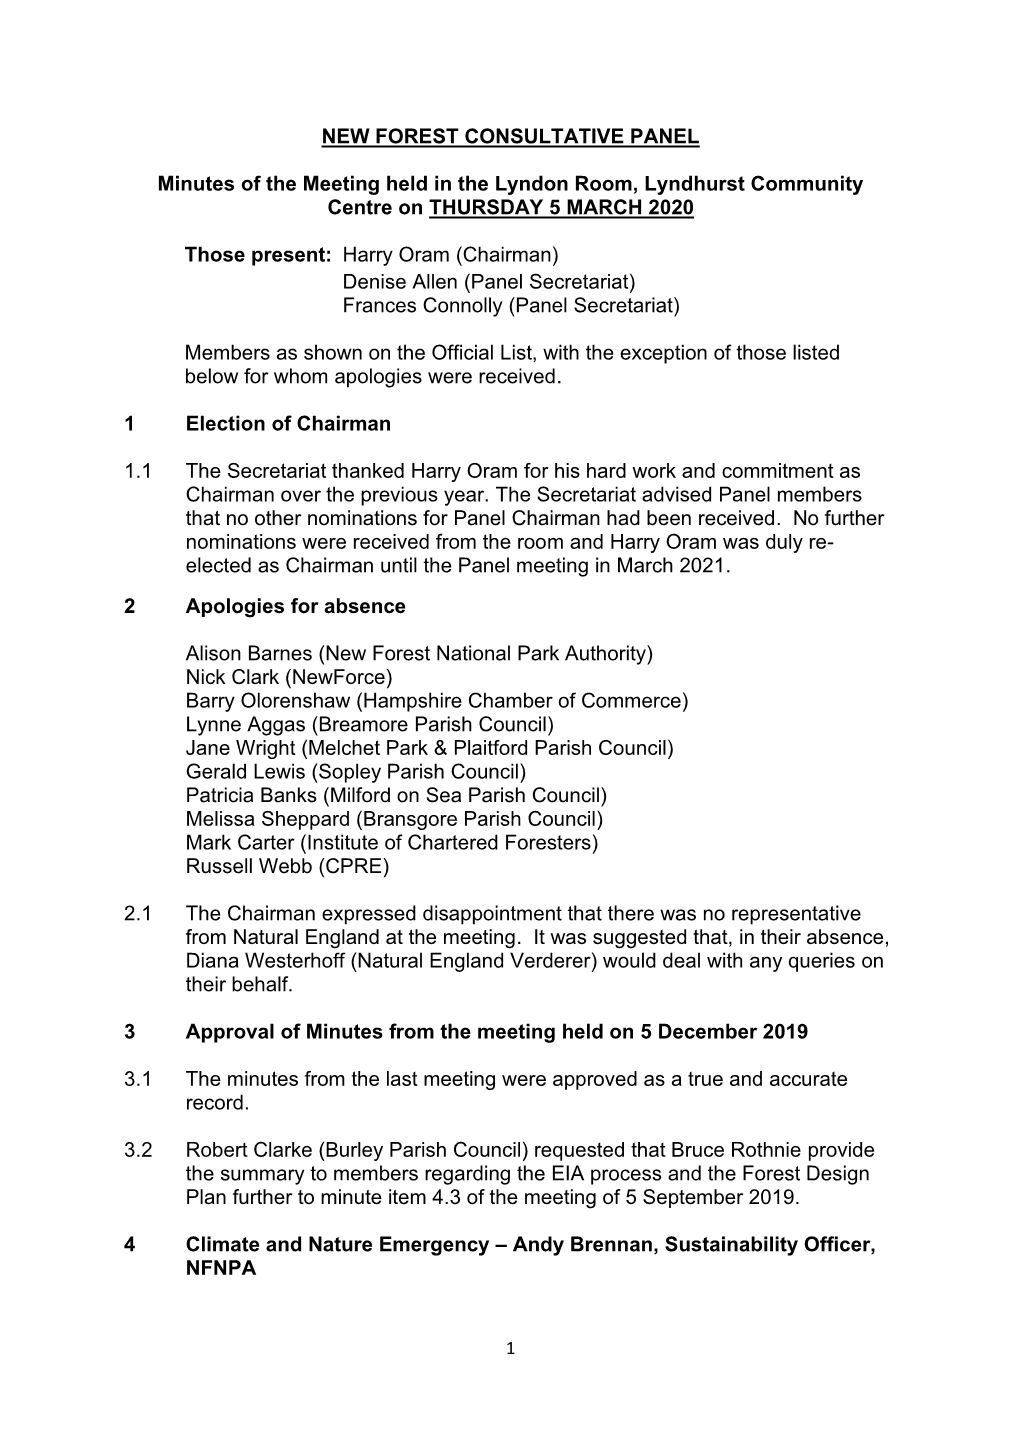 NEW FOREST CONSULTATIVE PANEL Minutes of the Meeting Held